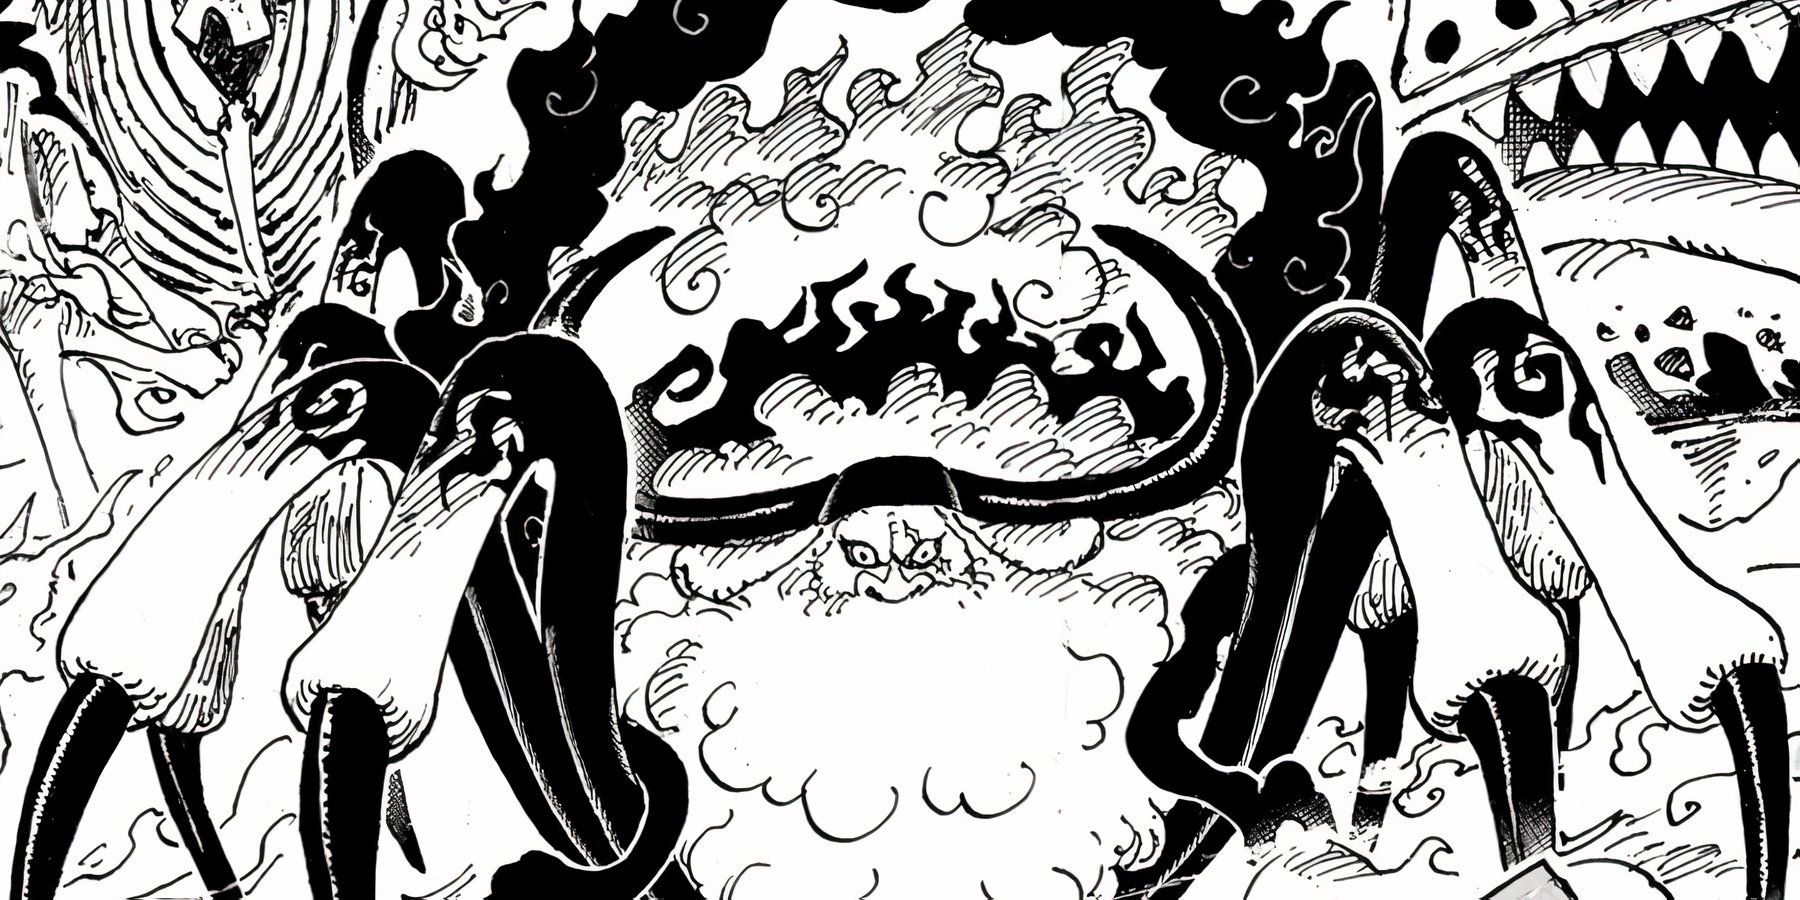 Saint Jaygarcia Saturn faces Luffy in his Beast Form with the other Five Elders in the One Piece manga.